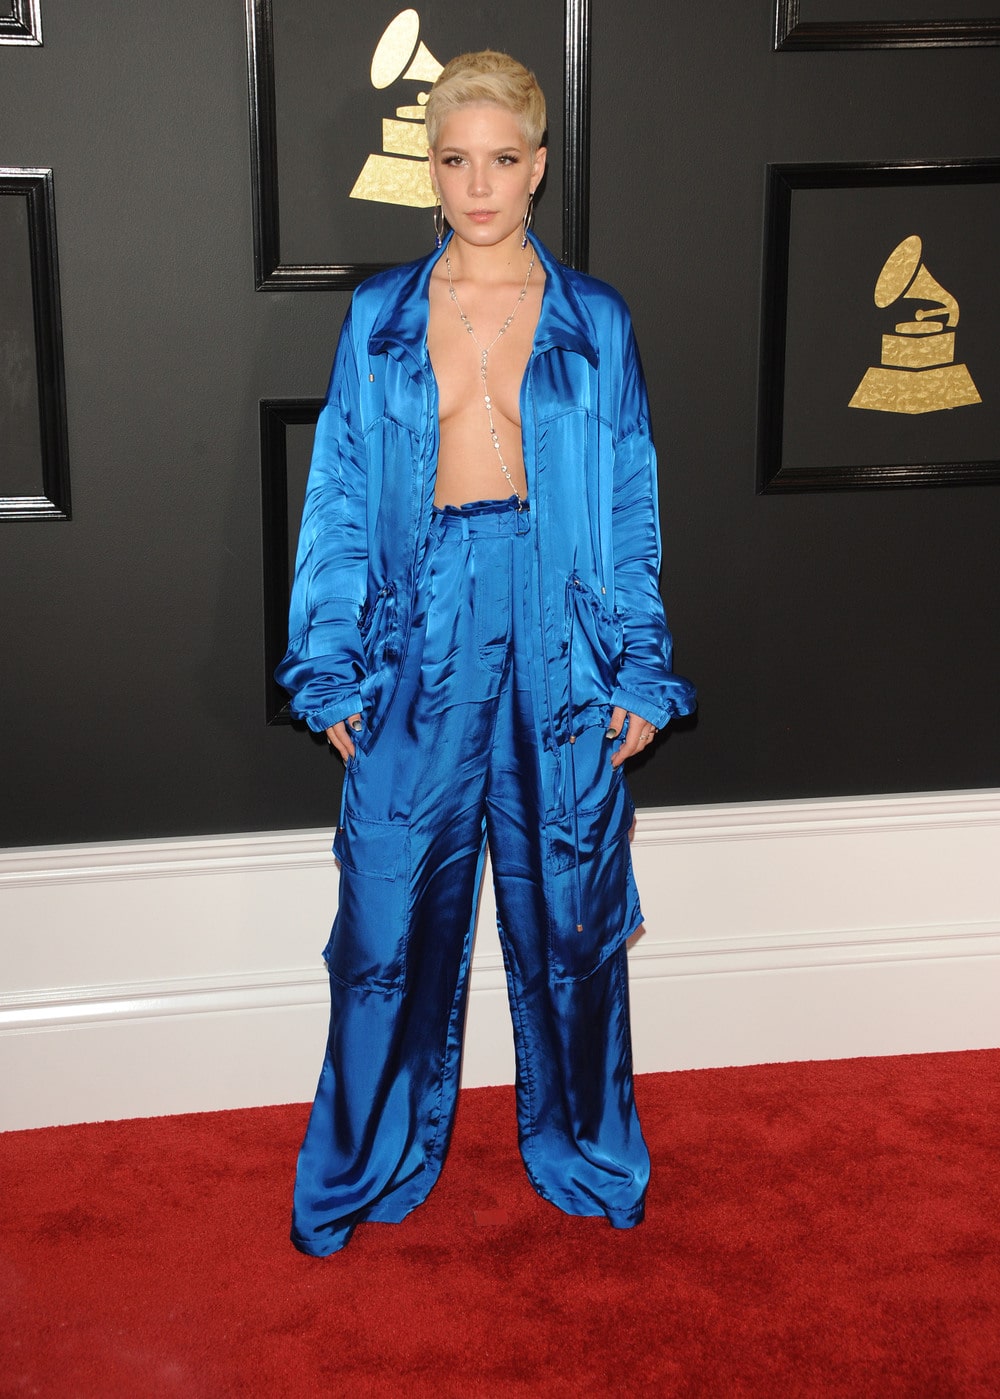 Halsey in Wijnants blue pajama suit at the 2017 Grammy Awards